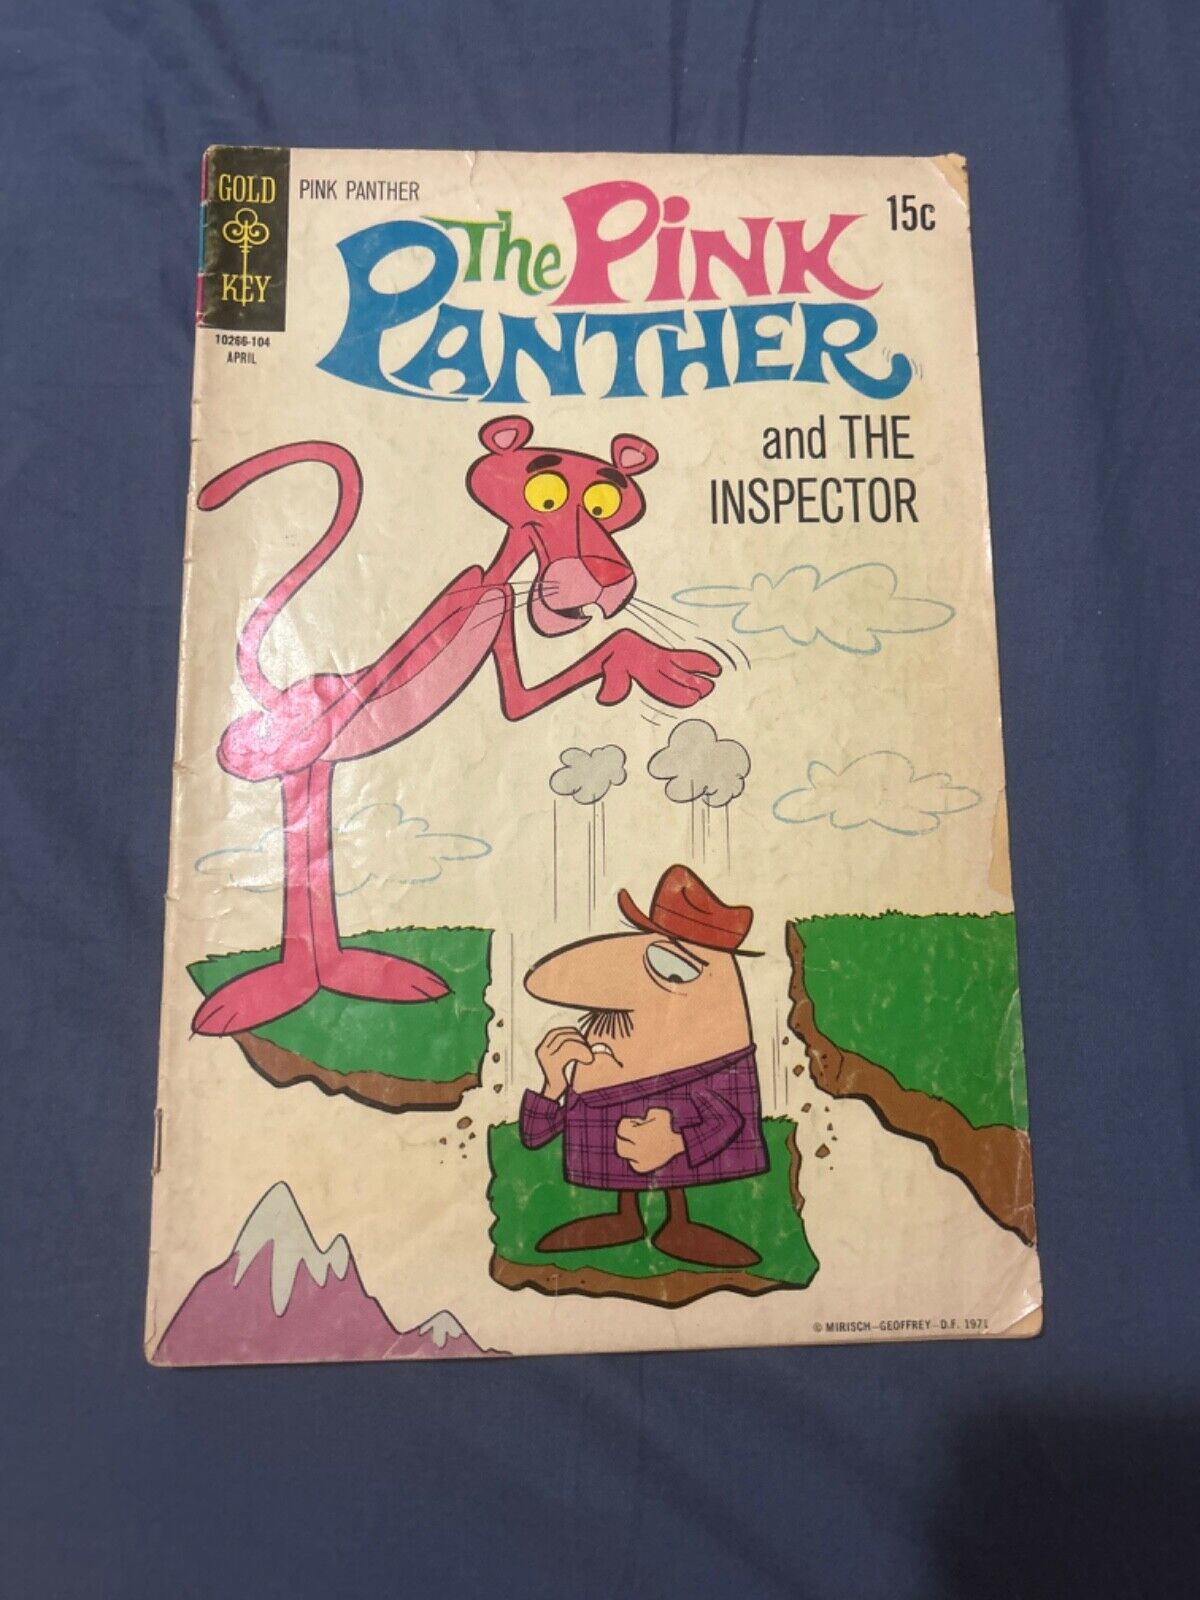 The Pink Panther and The Inspector #1